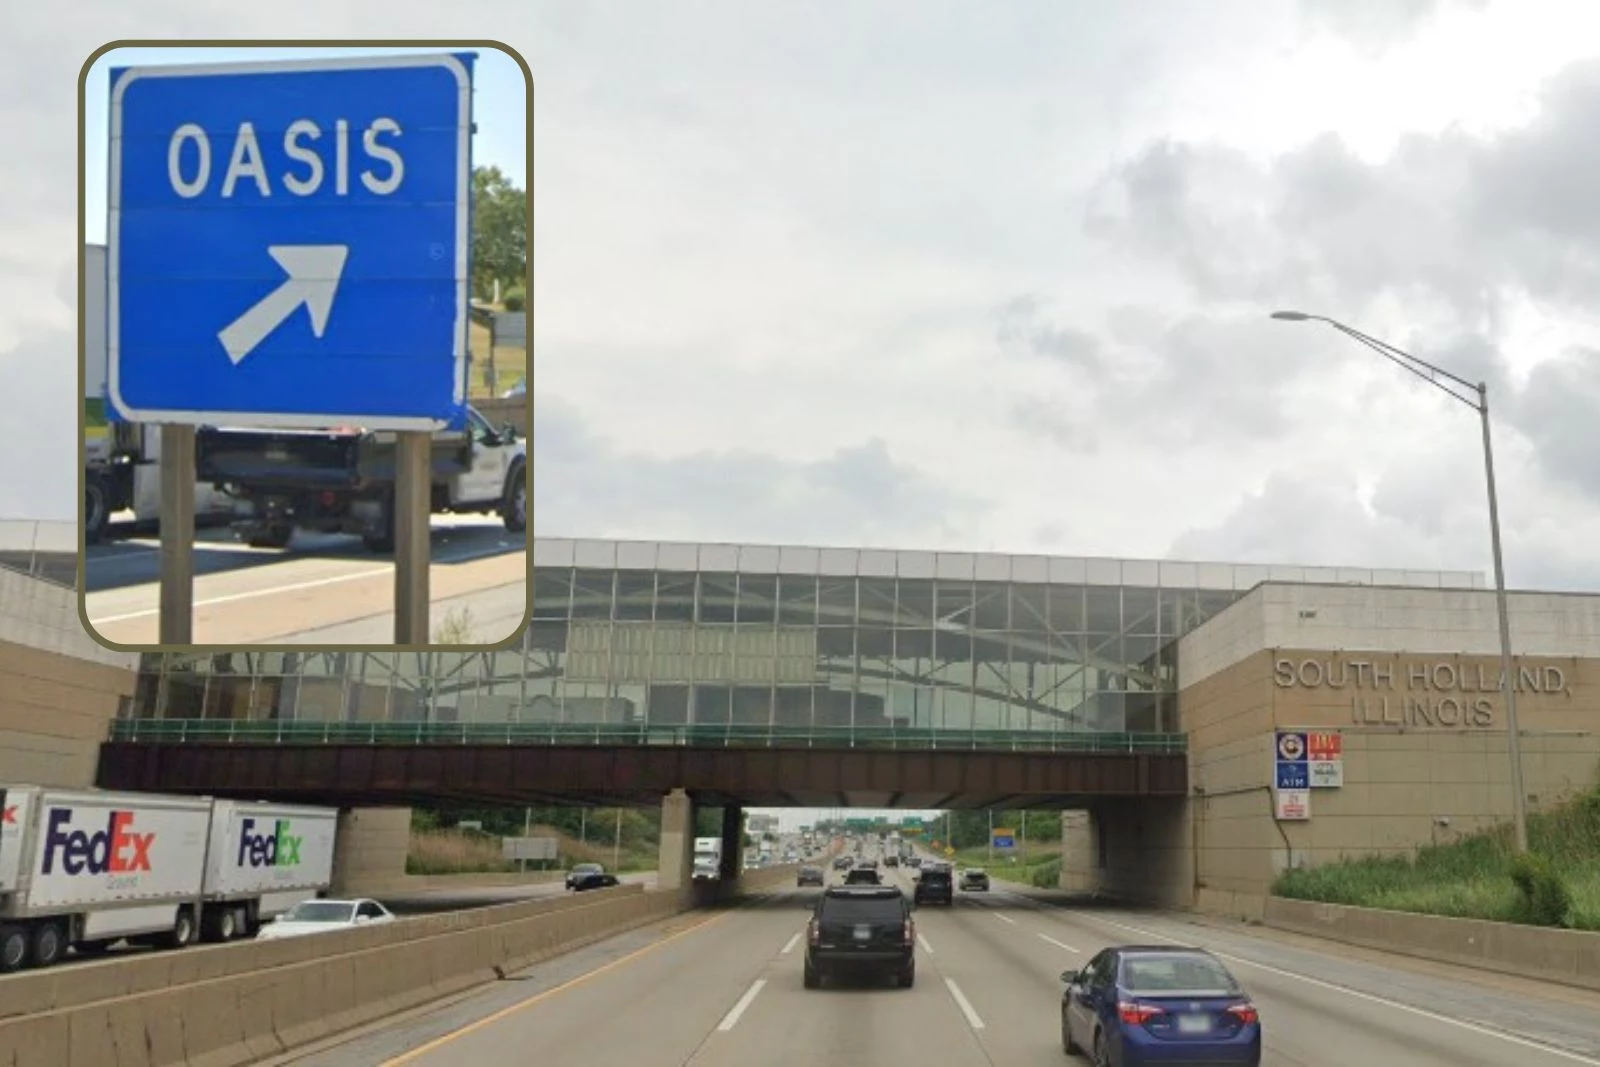 https://townsquare.media/site/690/files/2022/07/attachment-Illinois-tollway-oasis.jpg